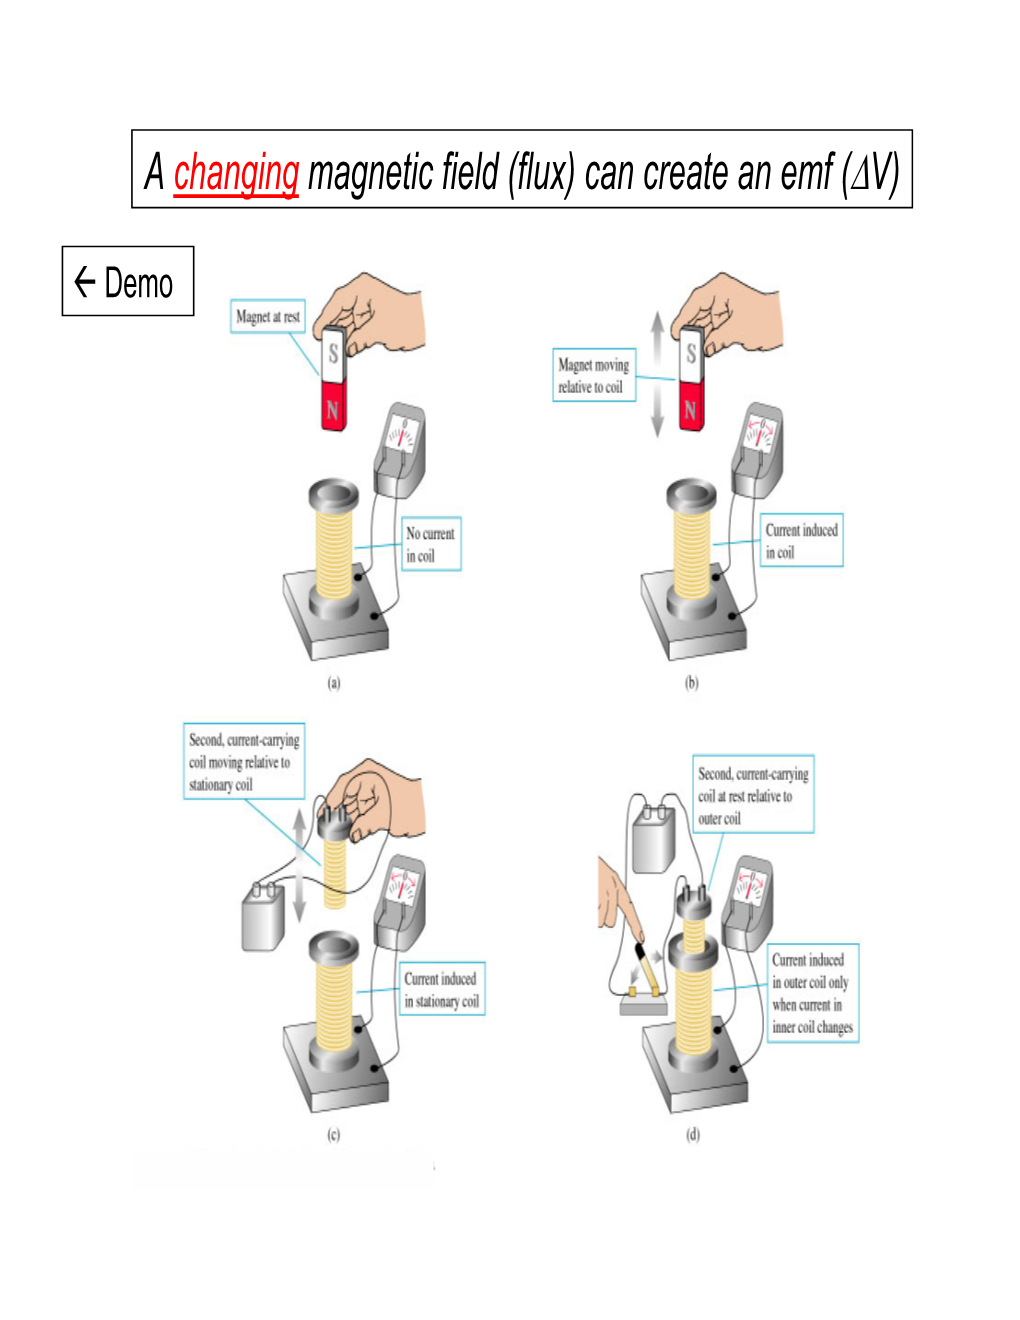 A Changing Magnetic Field (Flux) Can Create an Emf (ΔV)